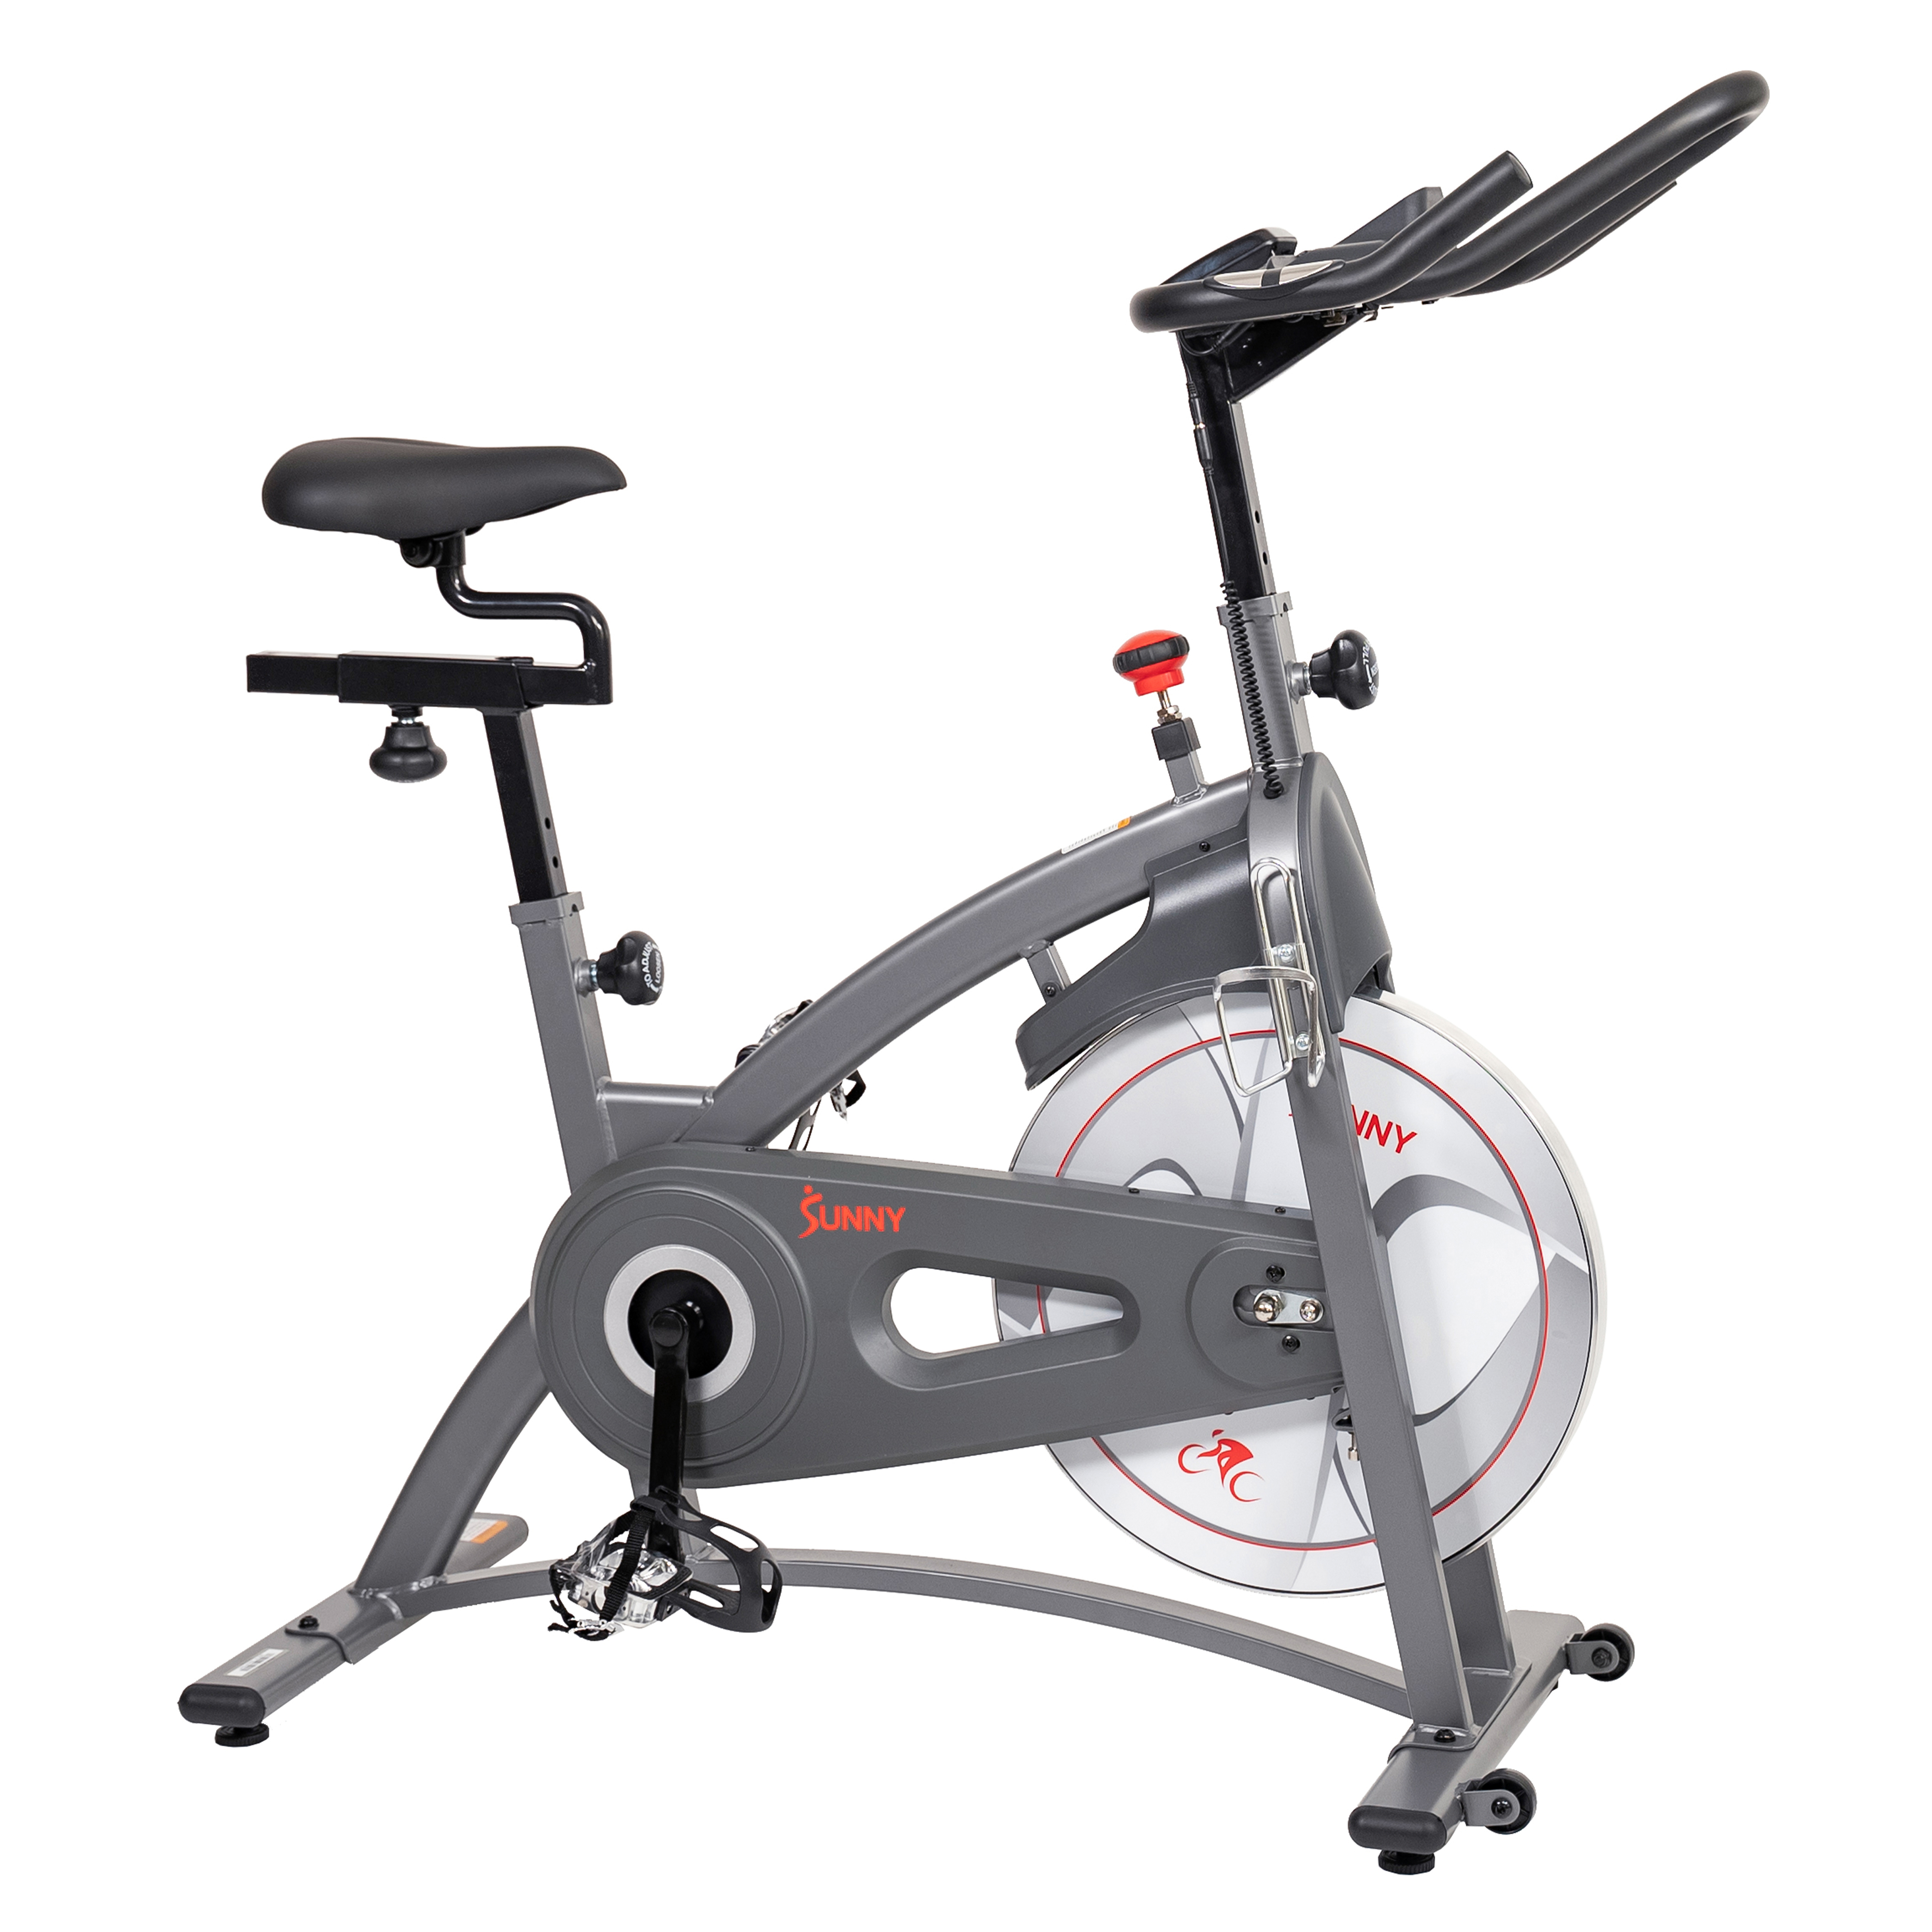 Sunny Health & Fitness Endurance Belt Drive Indoor Cycle Exercise Bike with Magnetic Resistance for Stationary Cardio, SF-B1877 - image 1 of 10